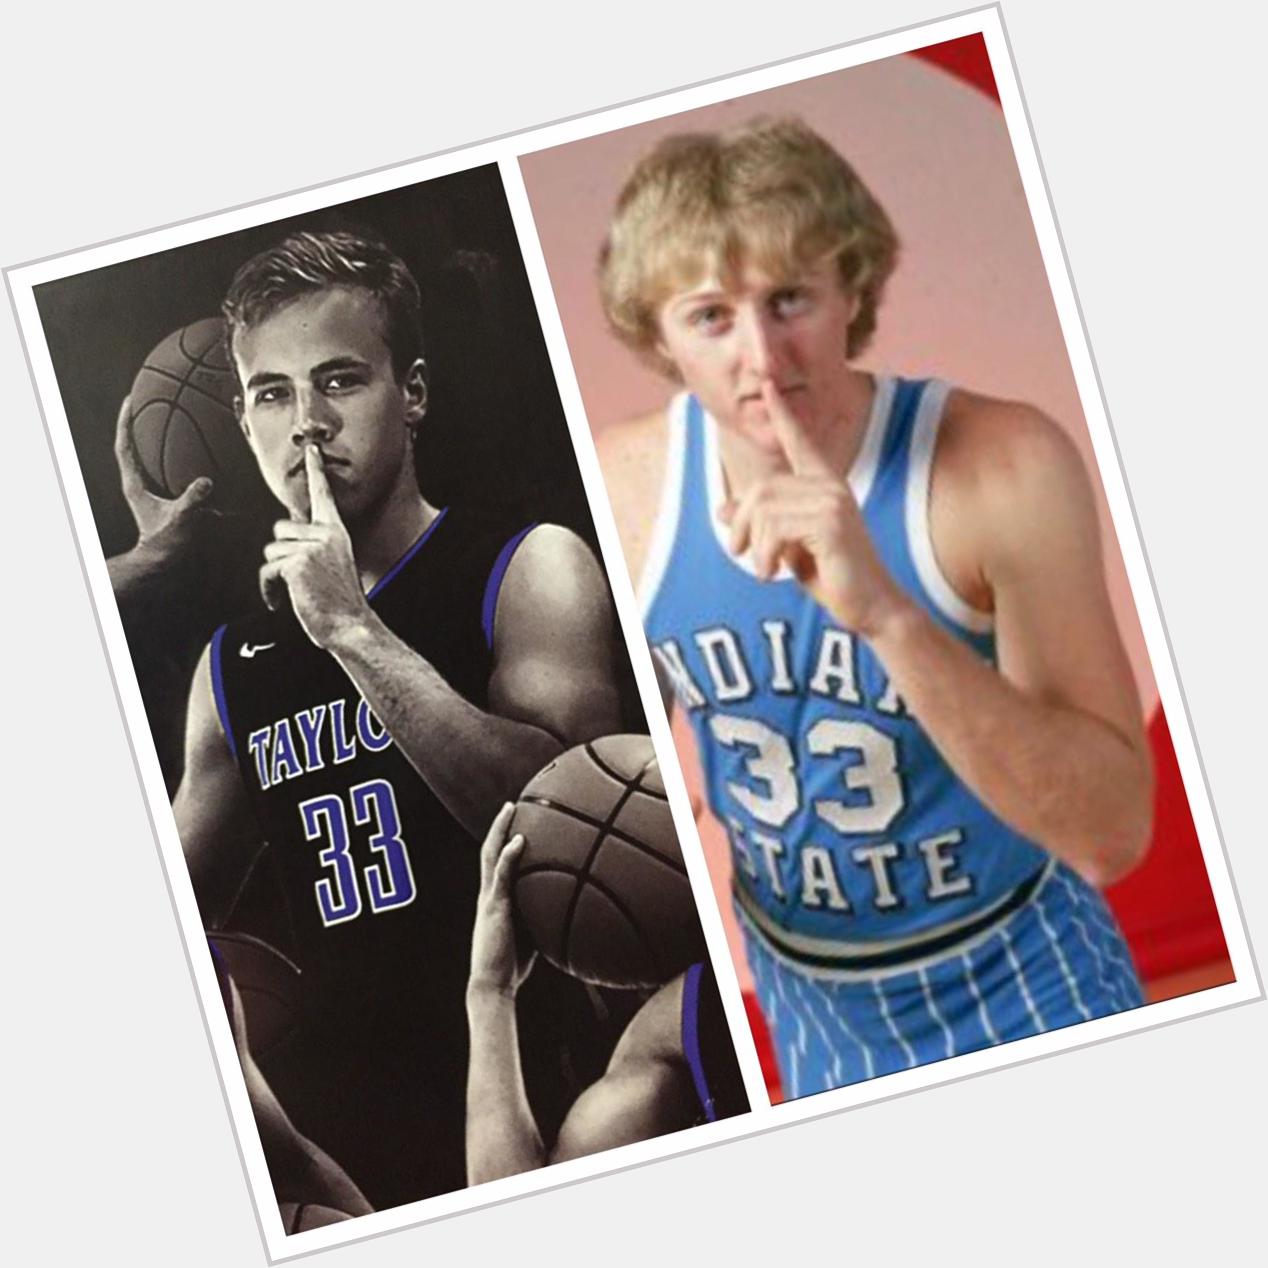 Happy birthday to larry bird, my role model and also for all the haters who dont understand... 